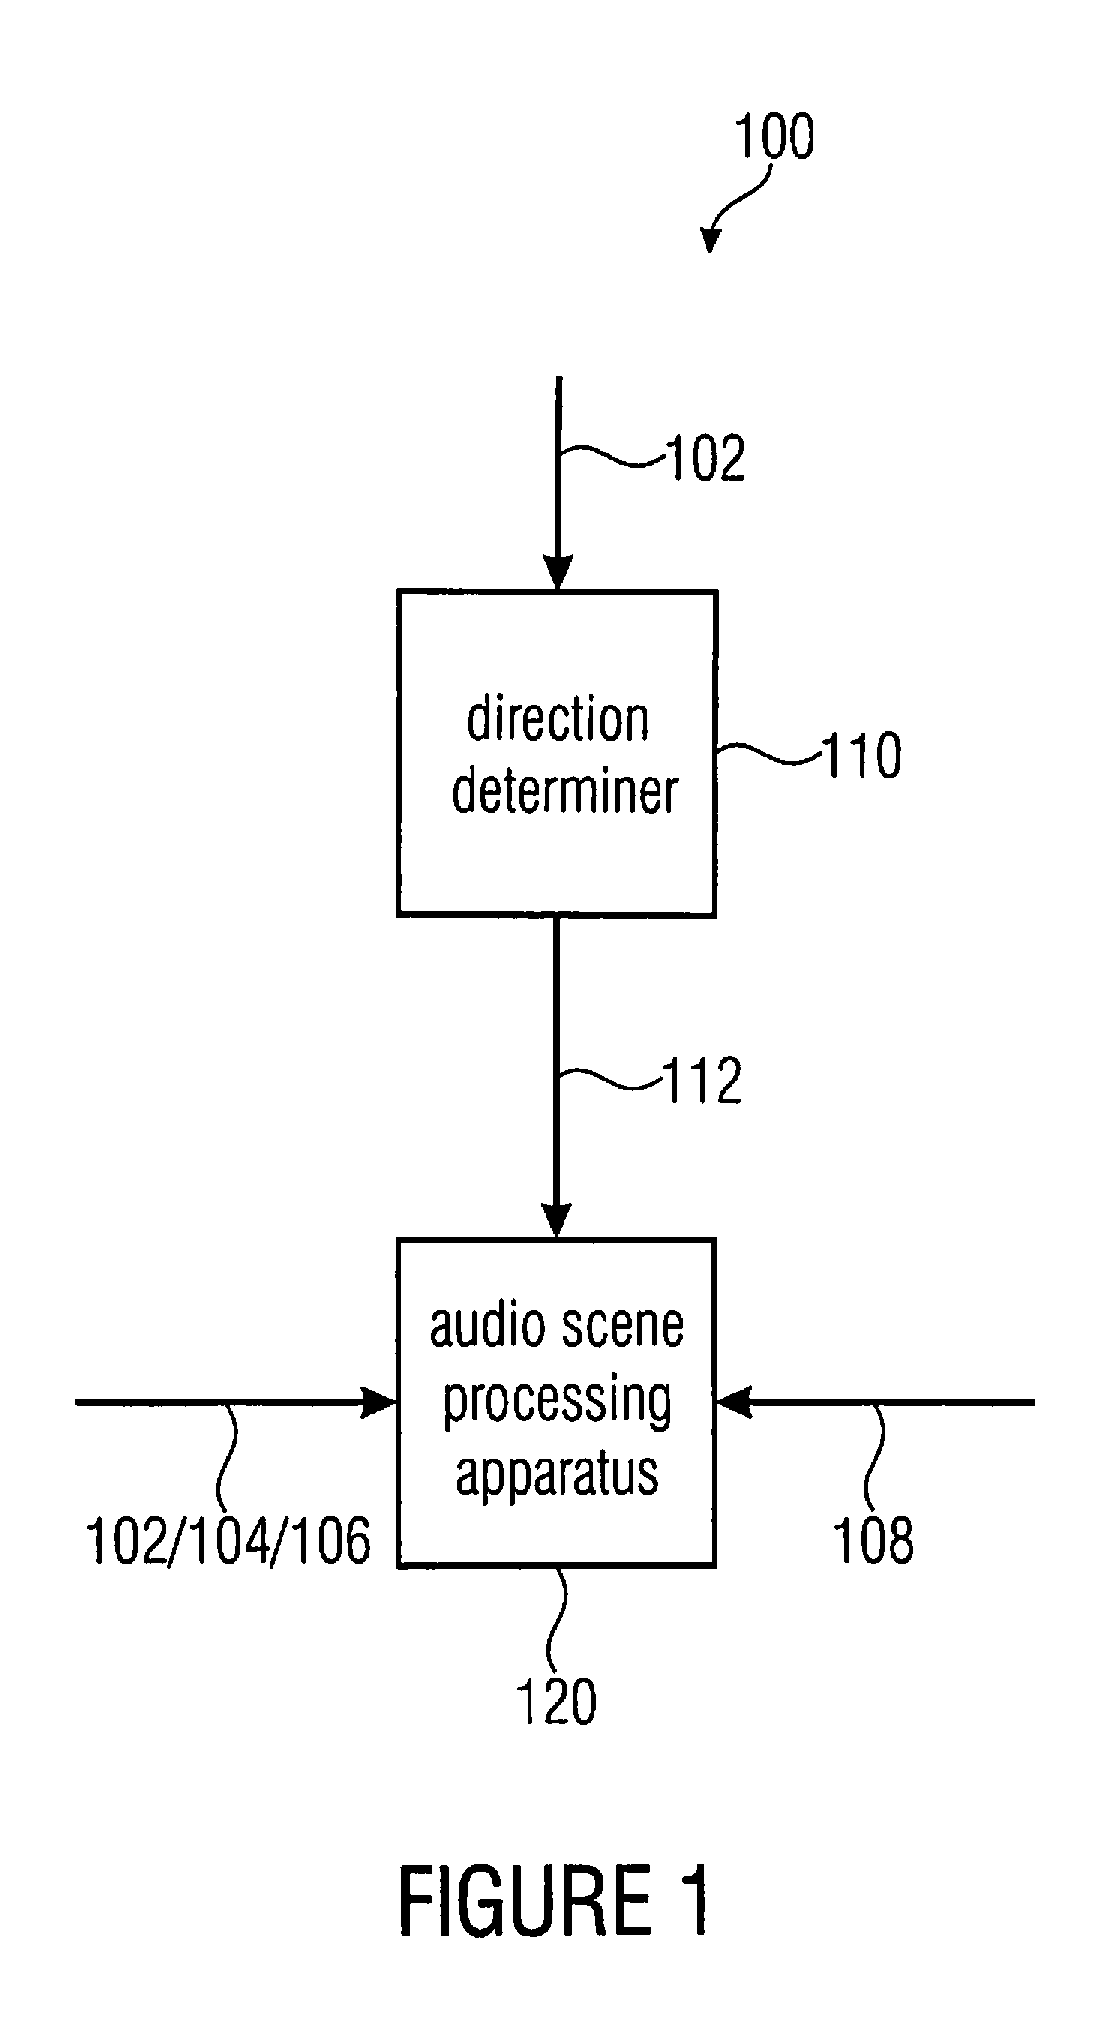 Apparatus for changing an audio scene and an apparatus for generating a directional function